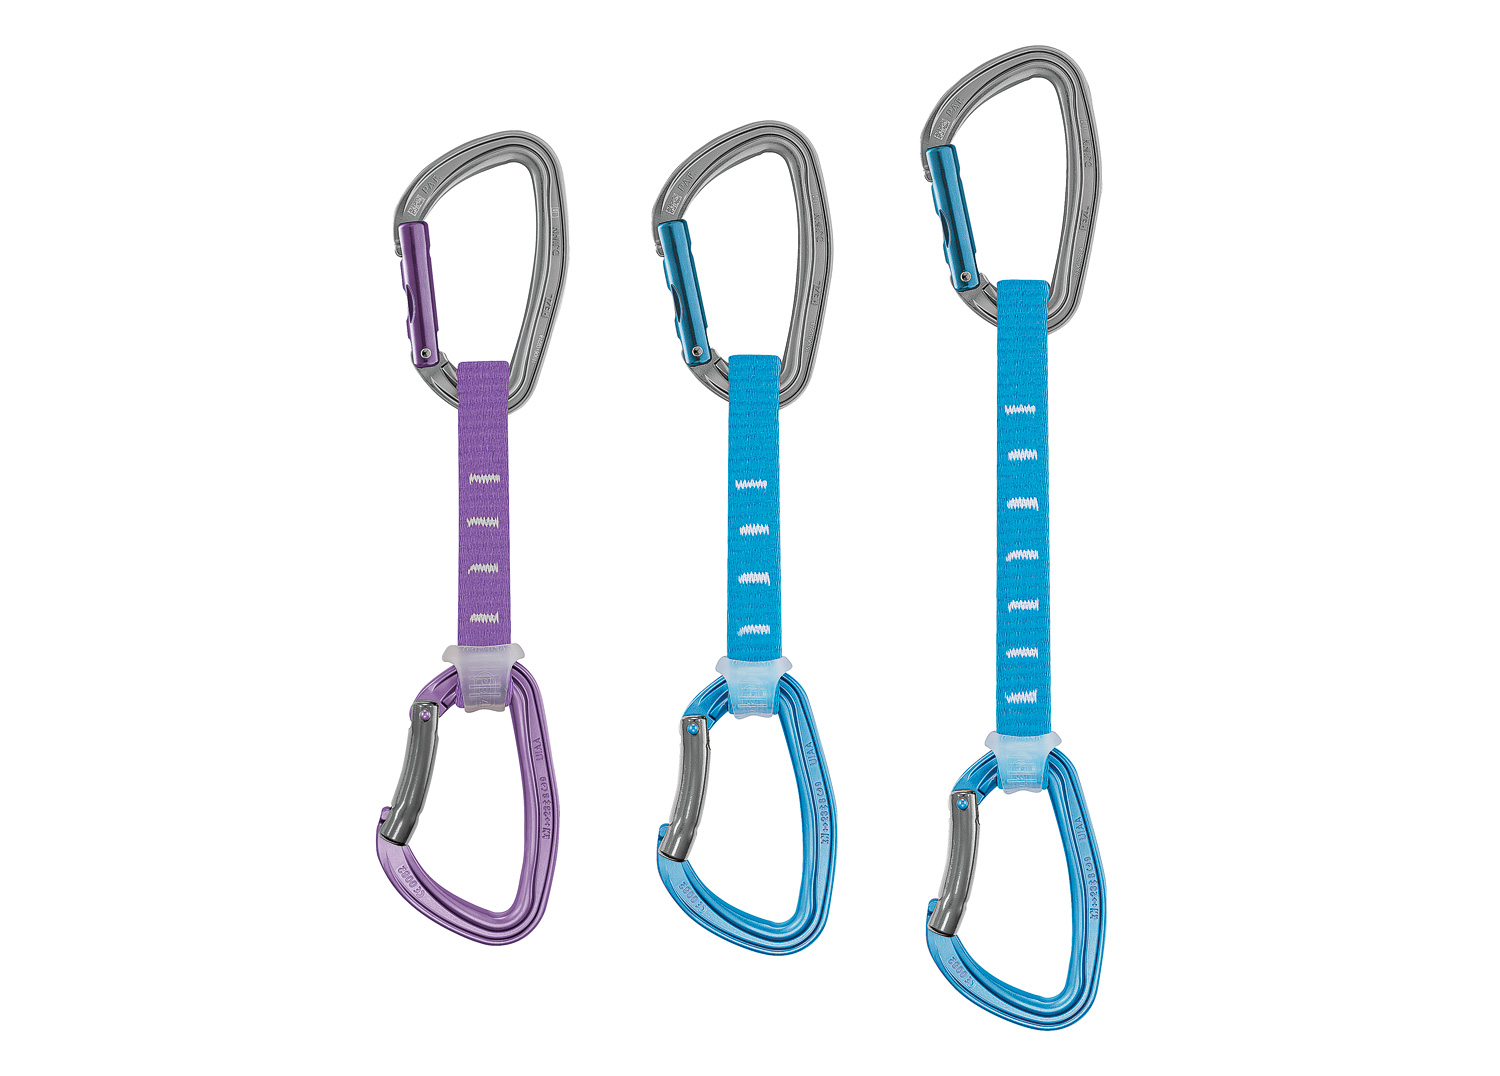 Rock Climbing Gear and Equipment Dash Wire Bright KAILAS Ultra Wire Quickdraw Climbing Carabiner 